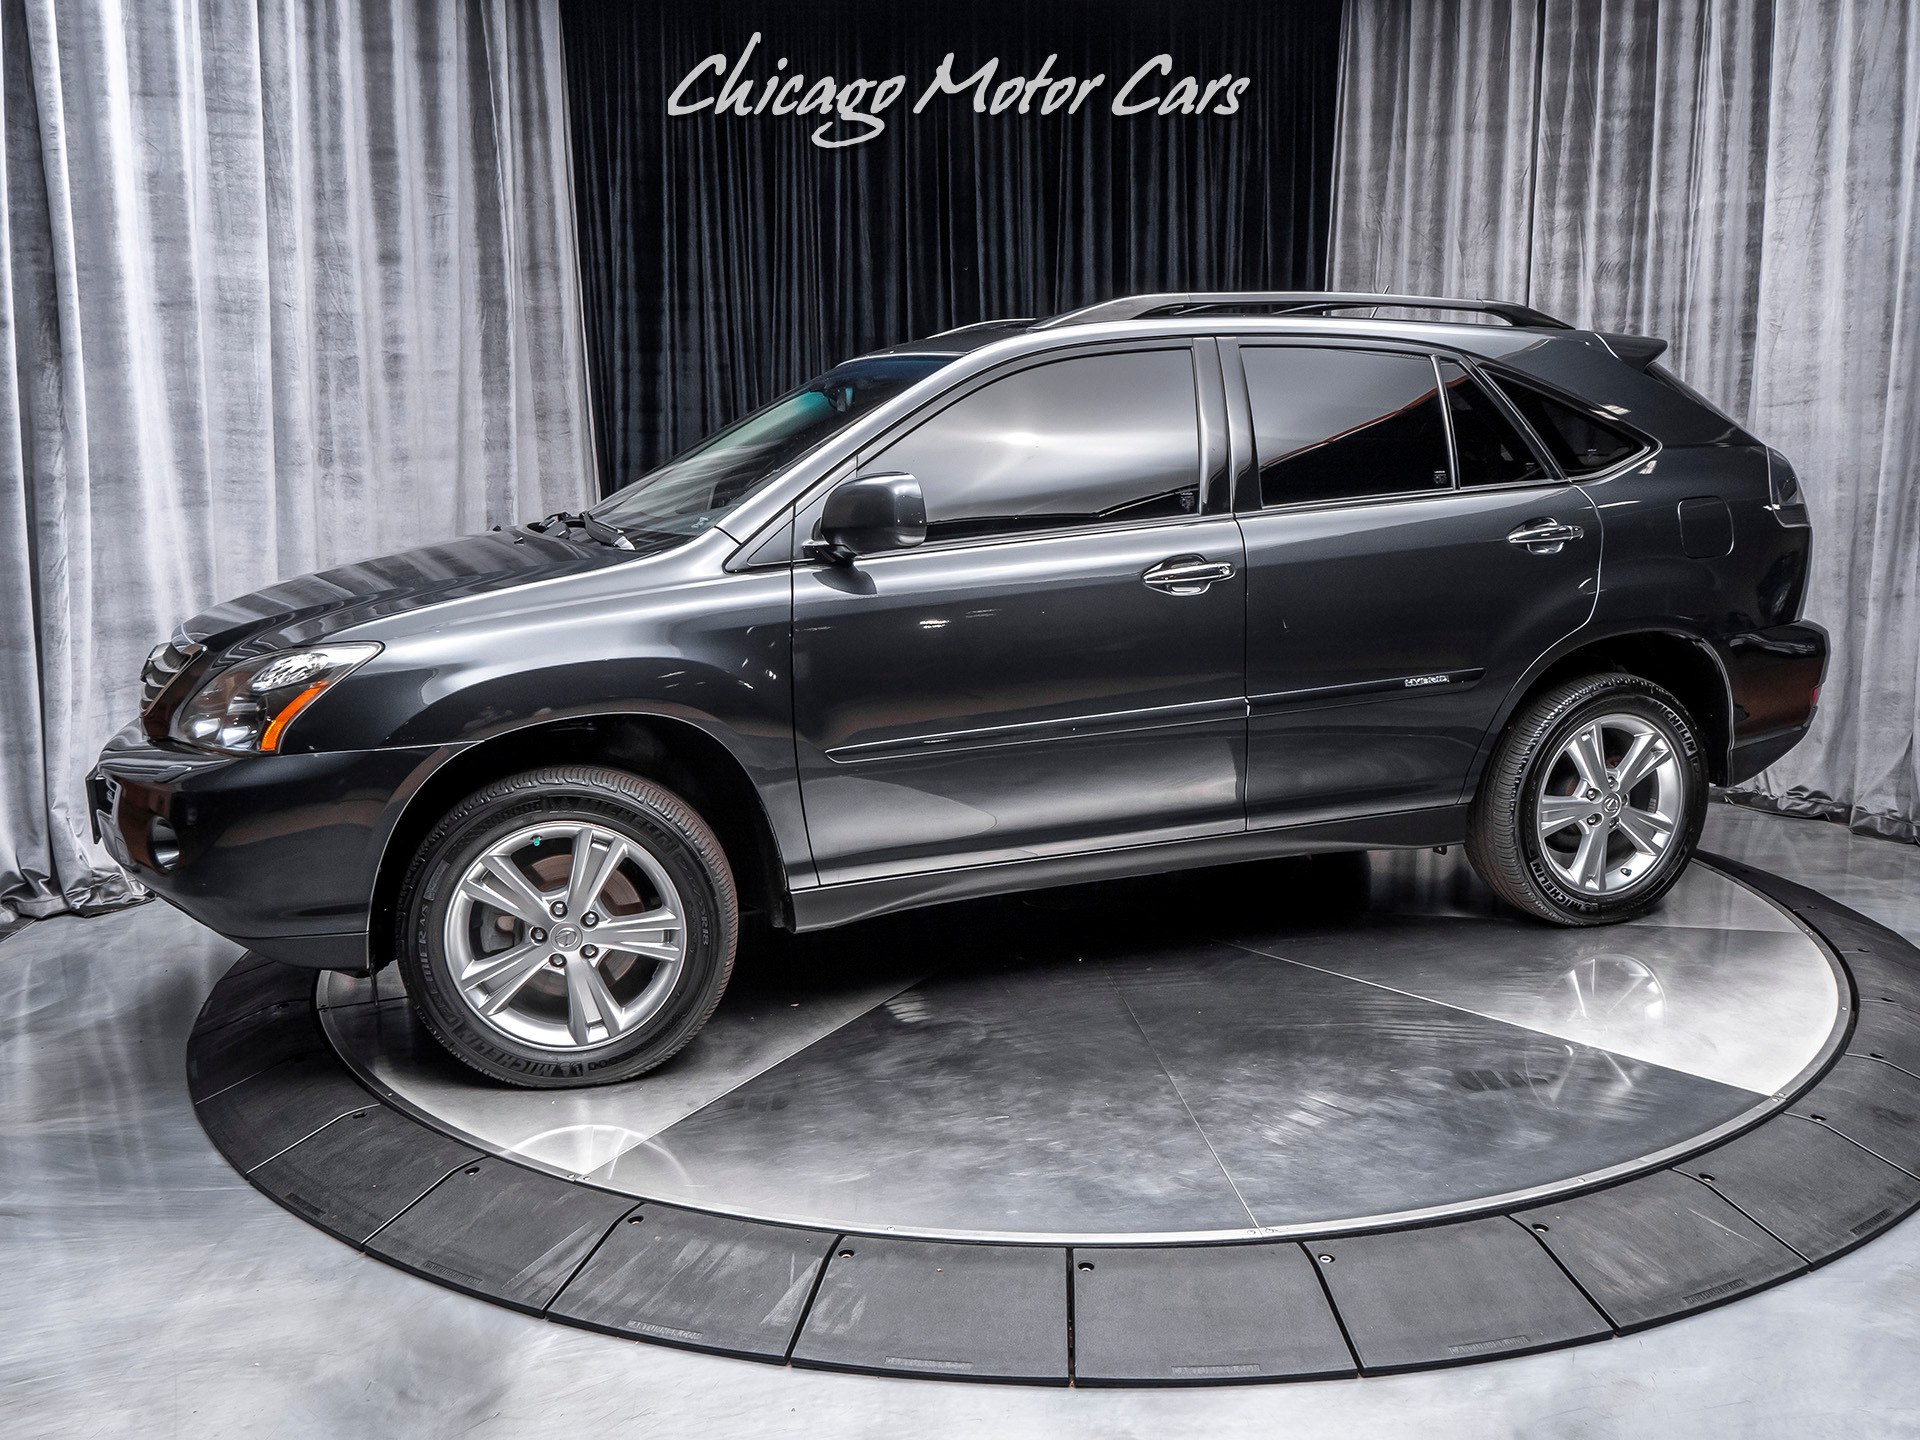 Used 2008 Lexus RX 400h Hybrid SUV AWD PREMIUM PLUS! For Sale (Special  Pricing) | Chicago Motor Cars Stock #15835A